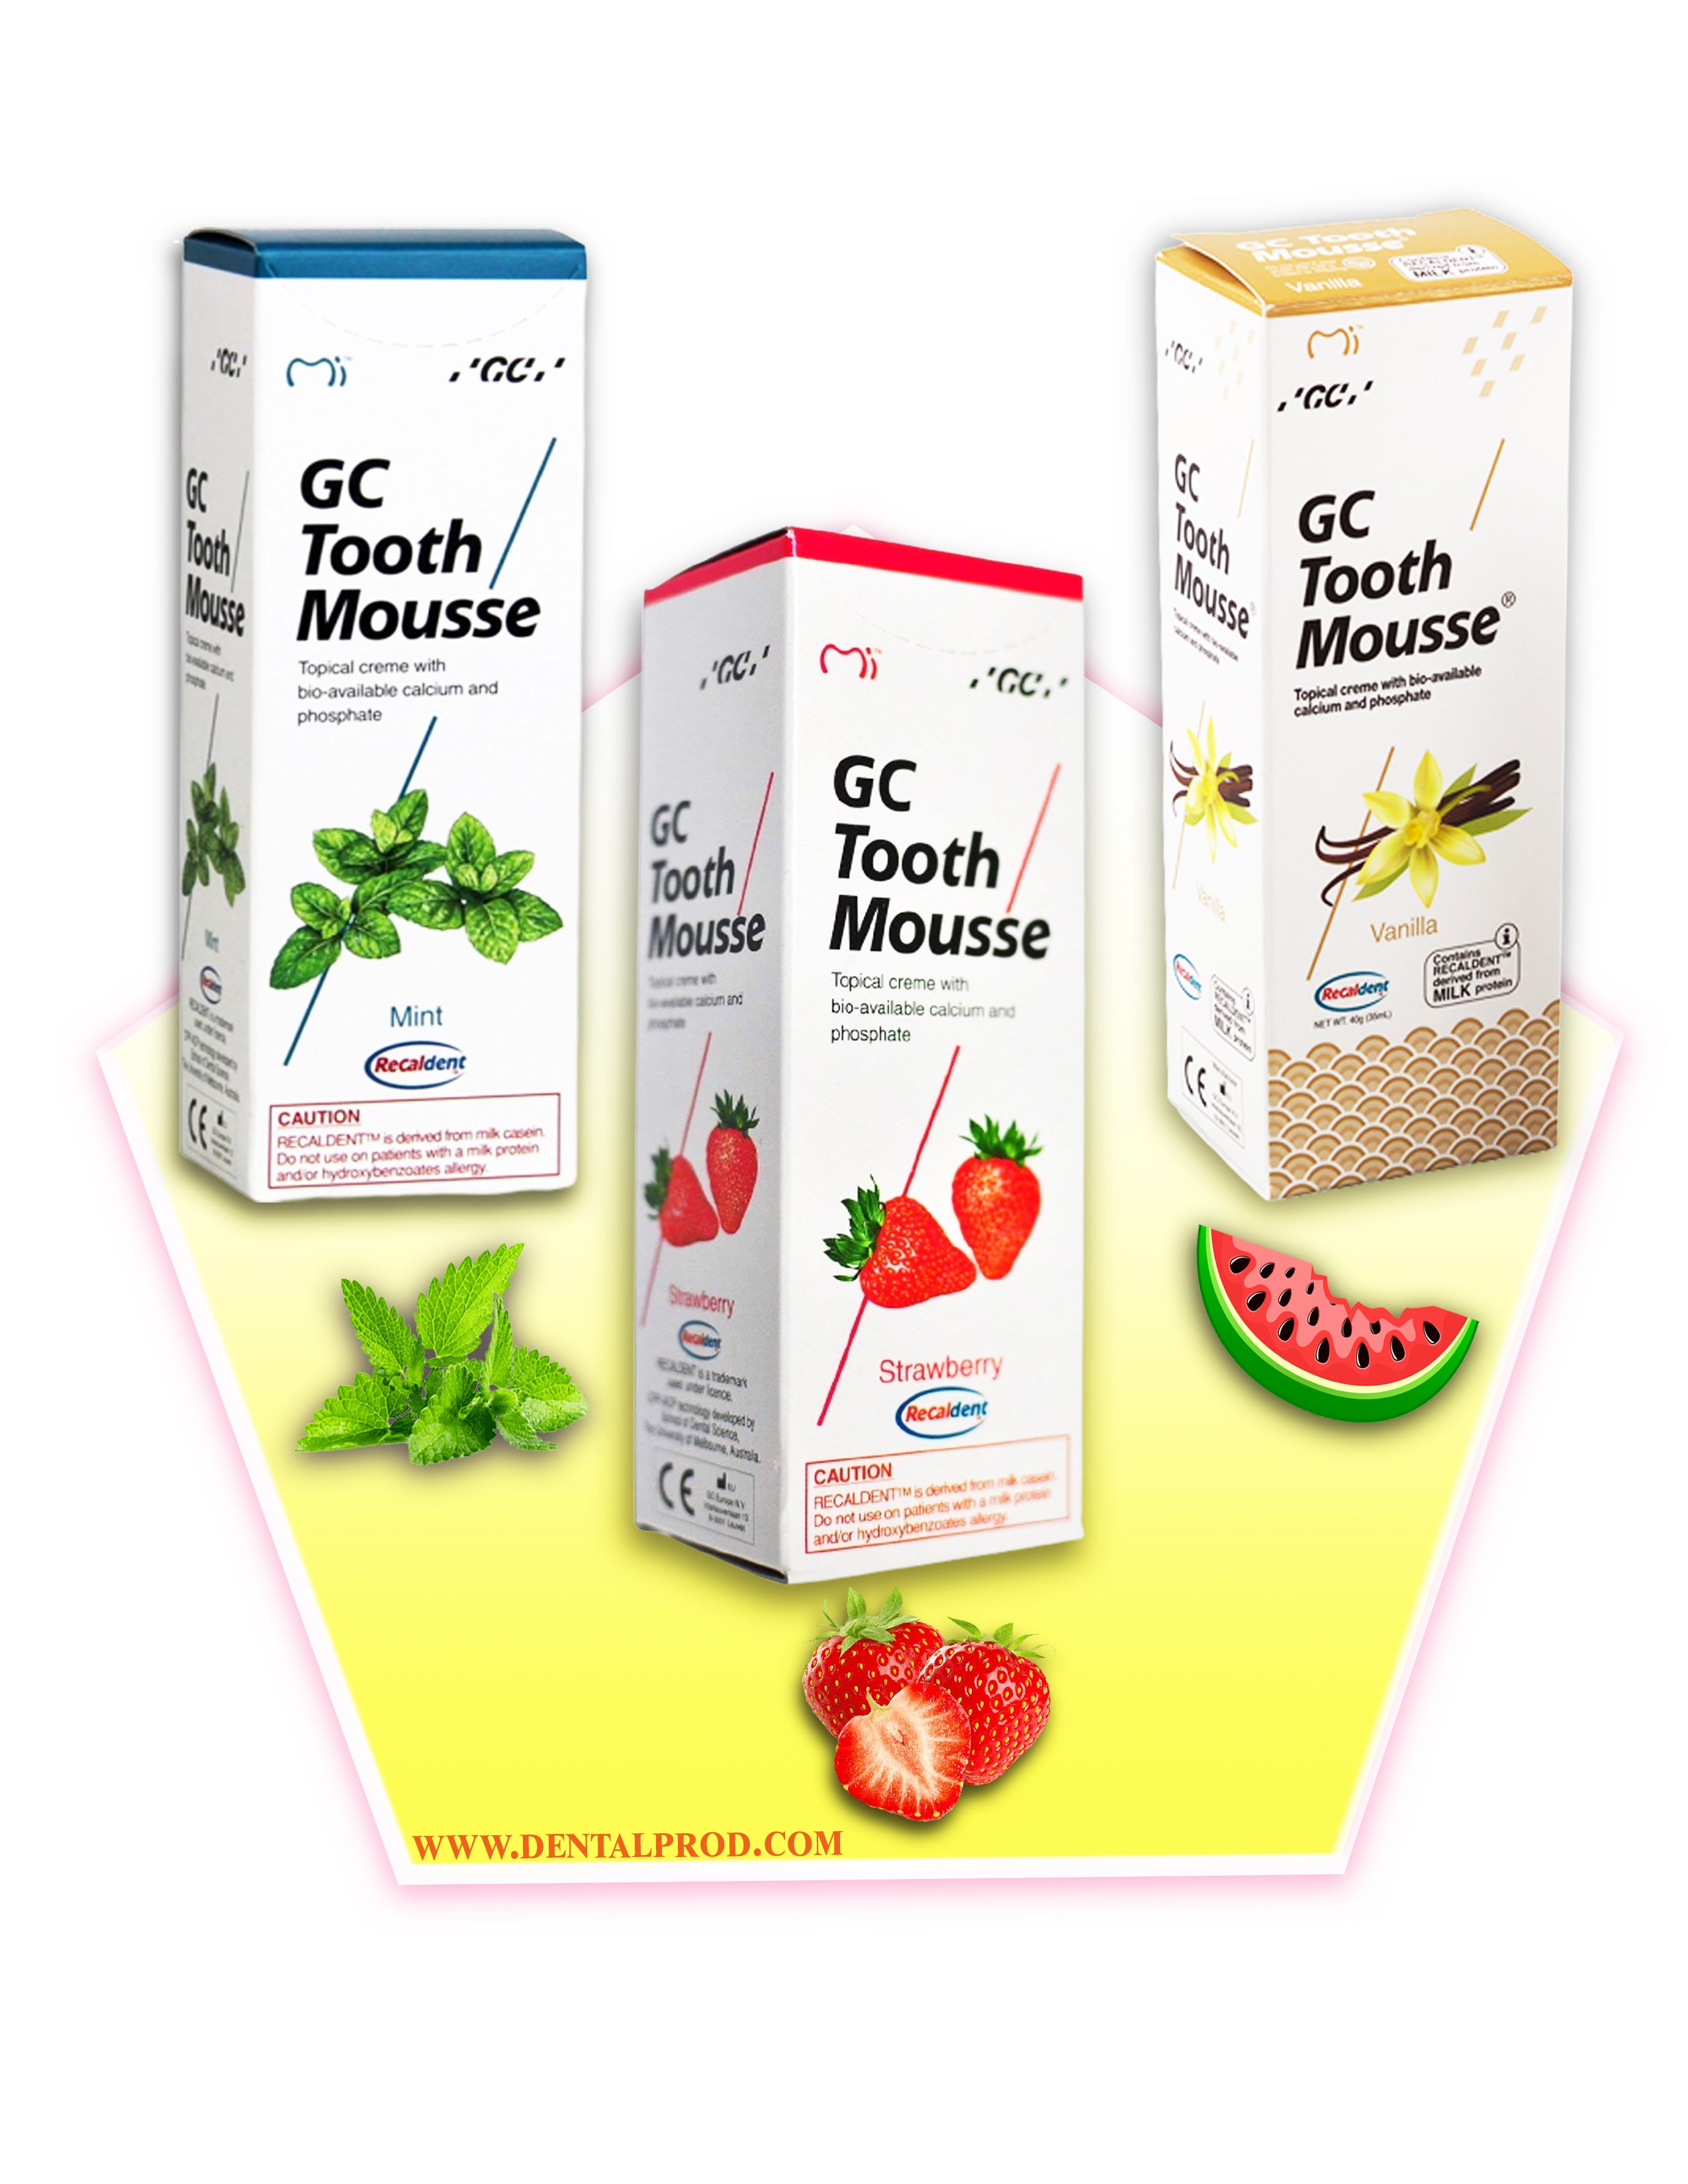 GC Tooth Mousse Dental Tooth Creme 40gm Tube Dental Toothpaste